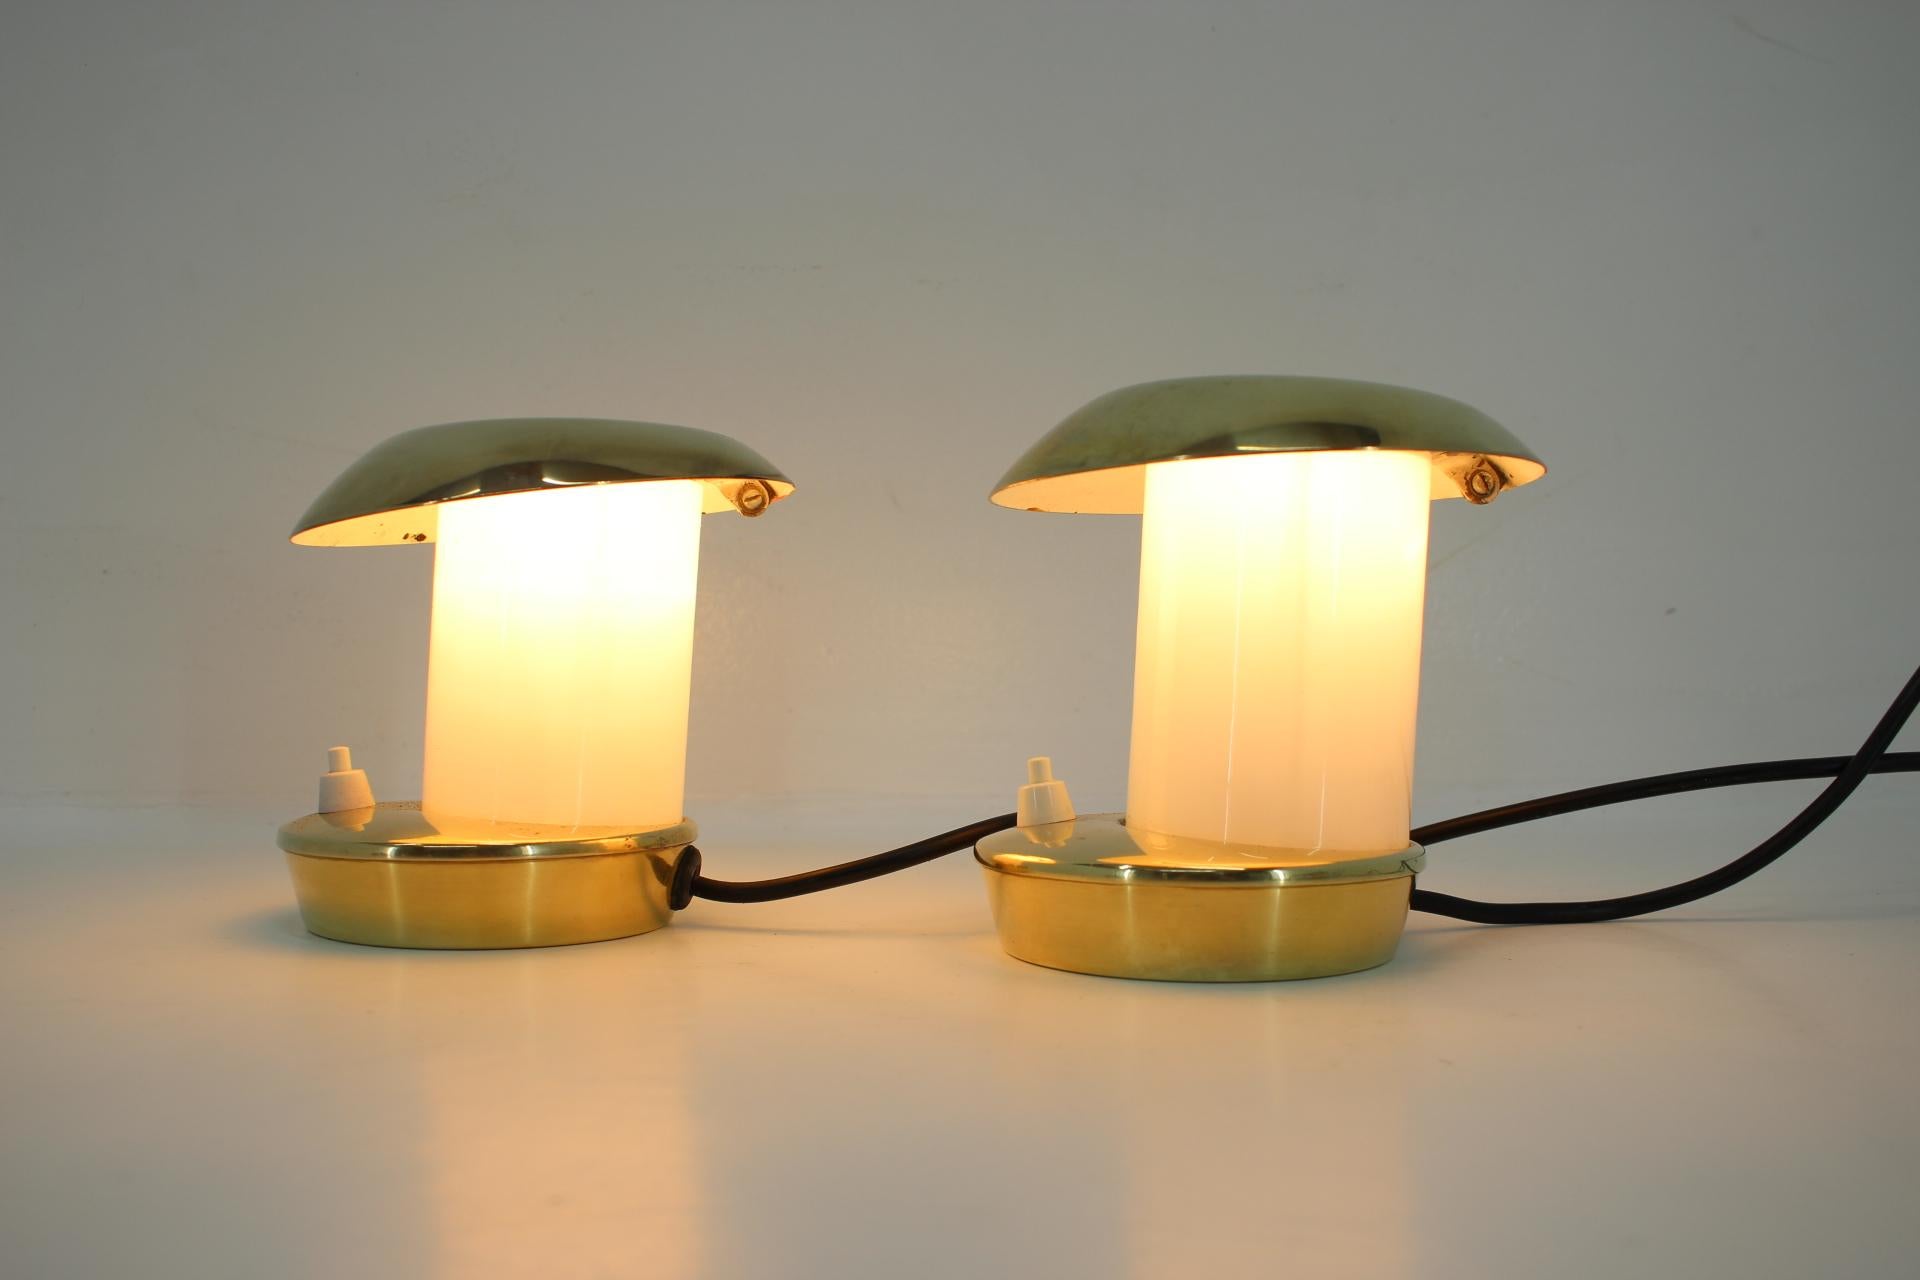 Czech Pair of Rare Brass Glass Bauhaus Table Lamps, 1930s For Sale